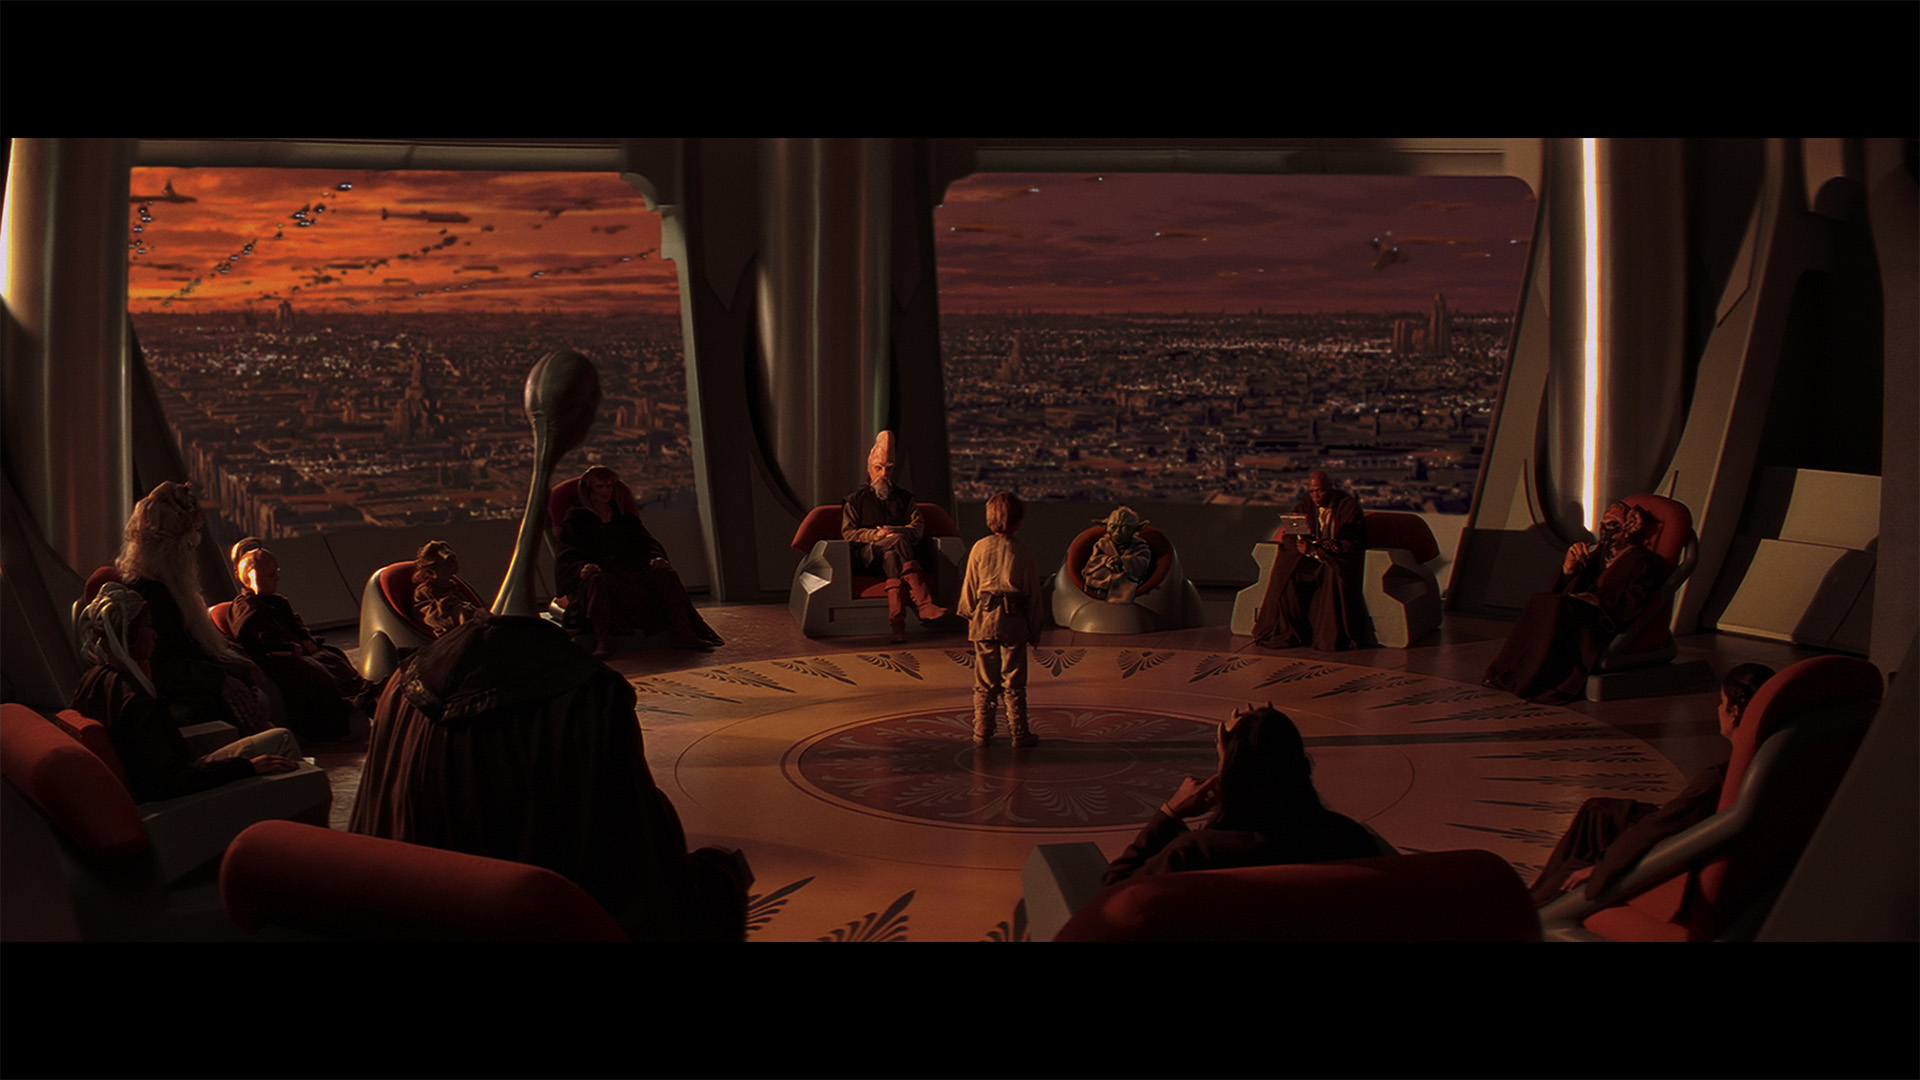 Anakin Skywalker is tested by the Jedi Council in Star Wars: The Phantom Menace.